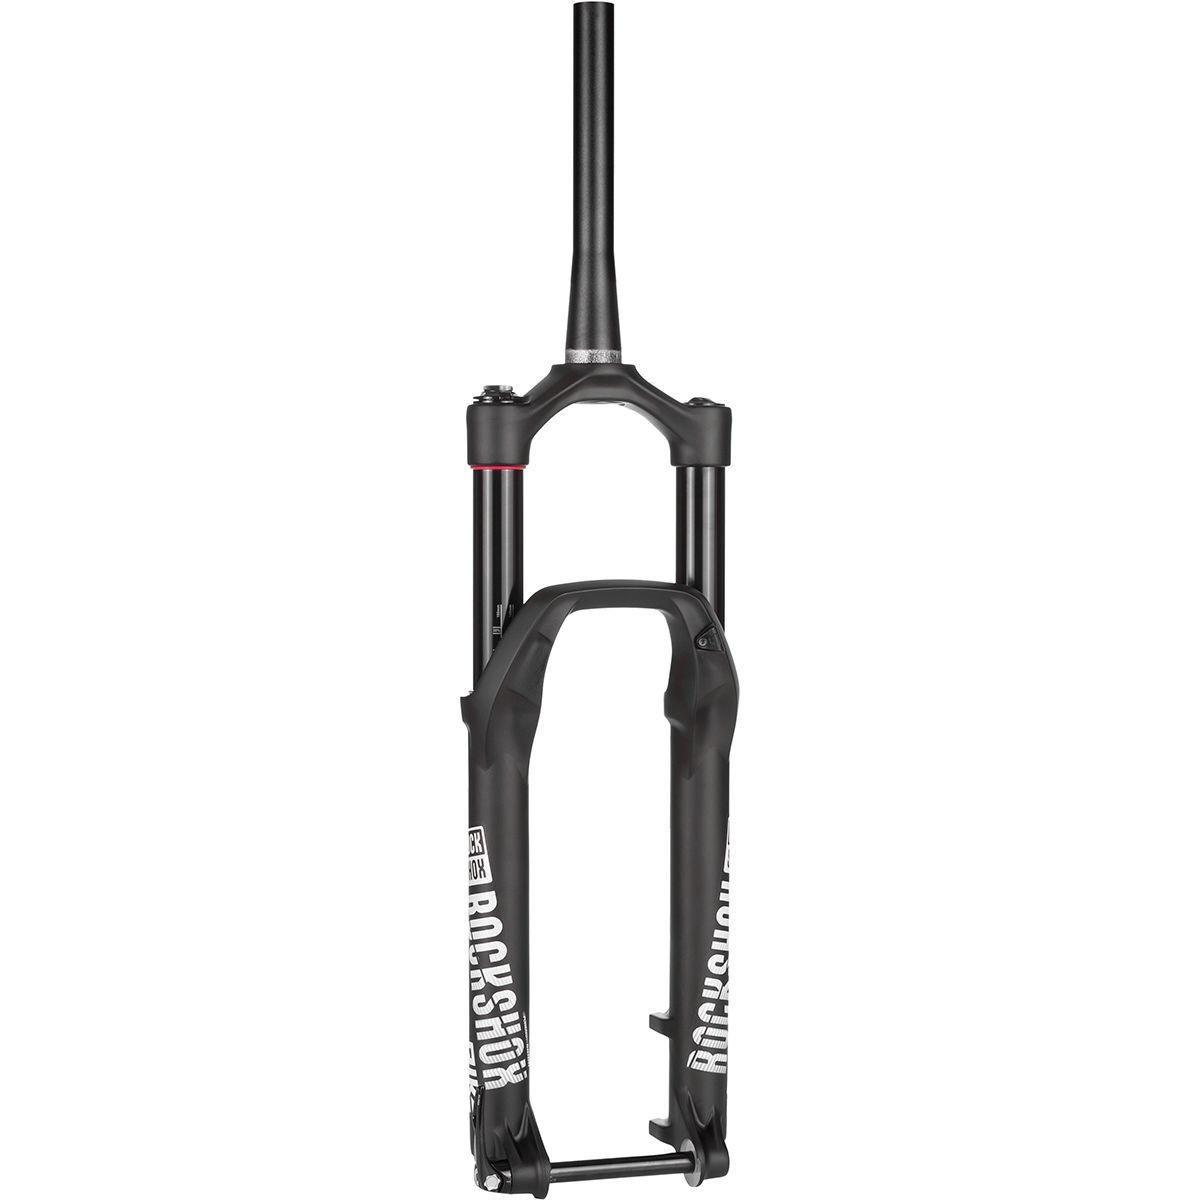 RockShox Pike RCT3 Solo Air 140 Boost 51mm Offset Fork 29275